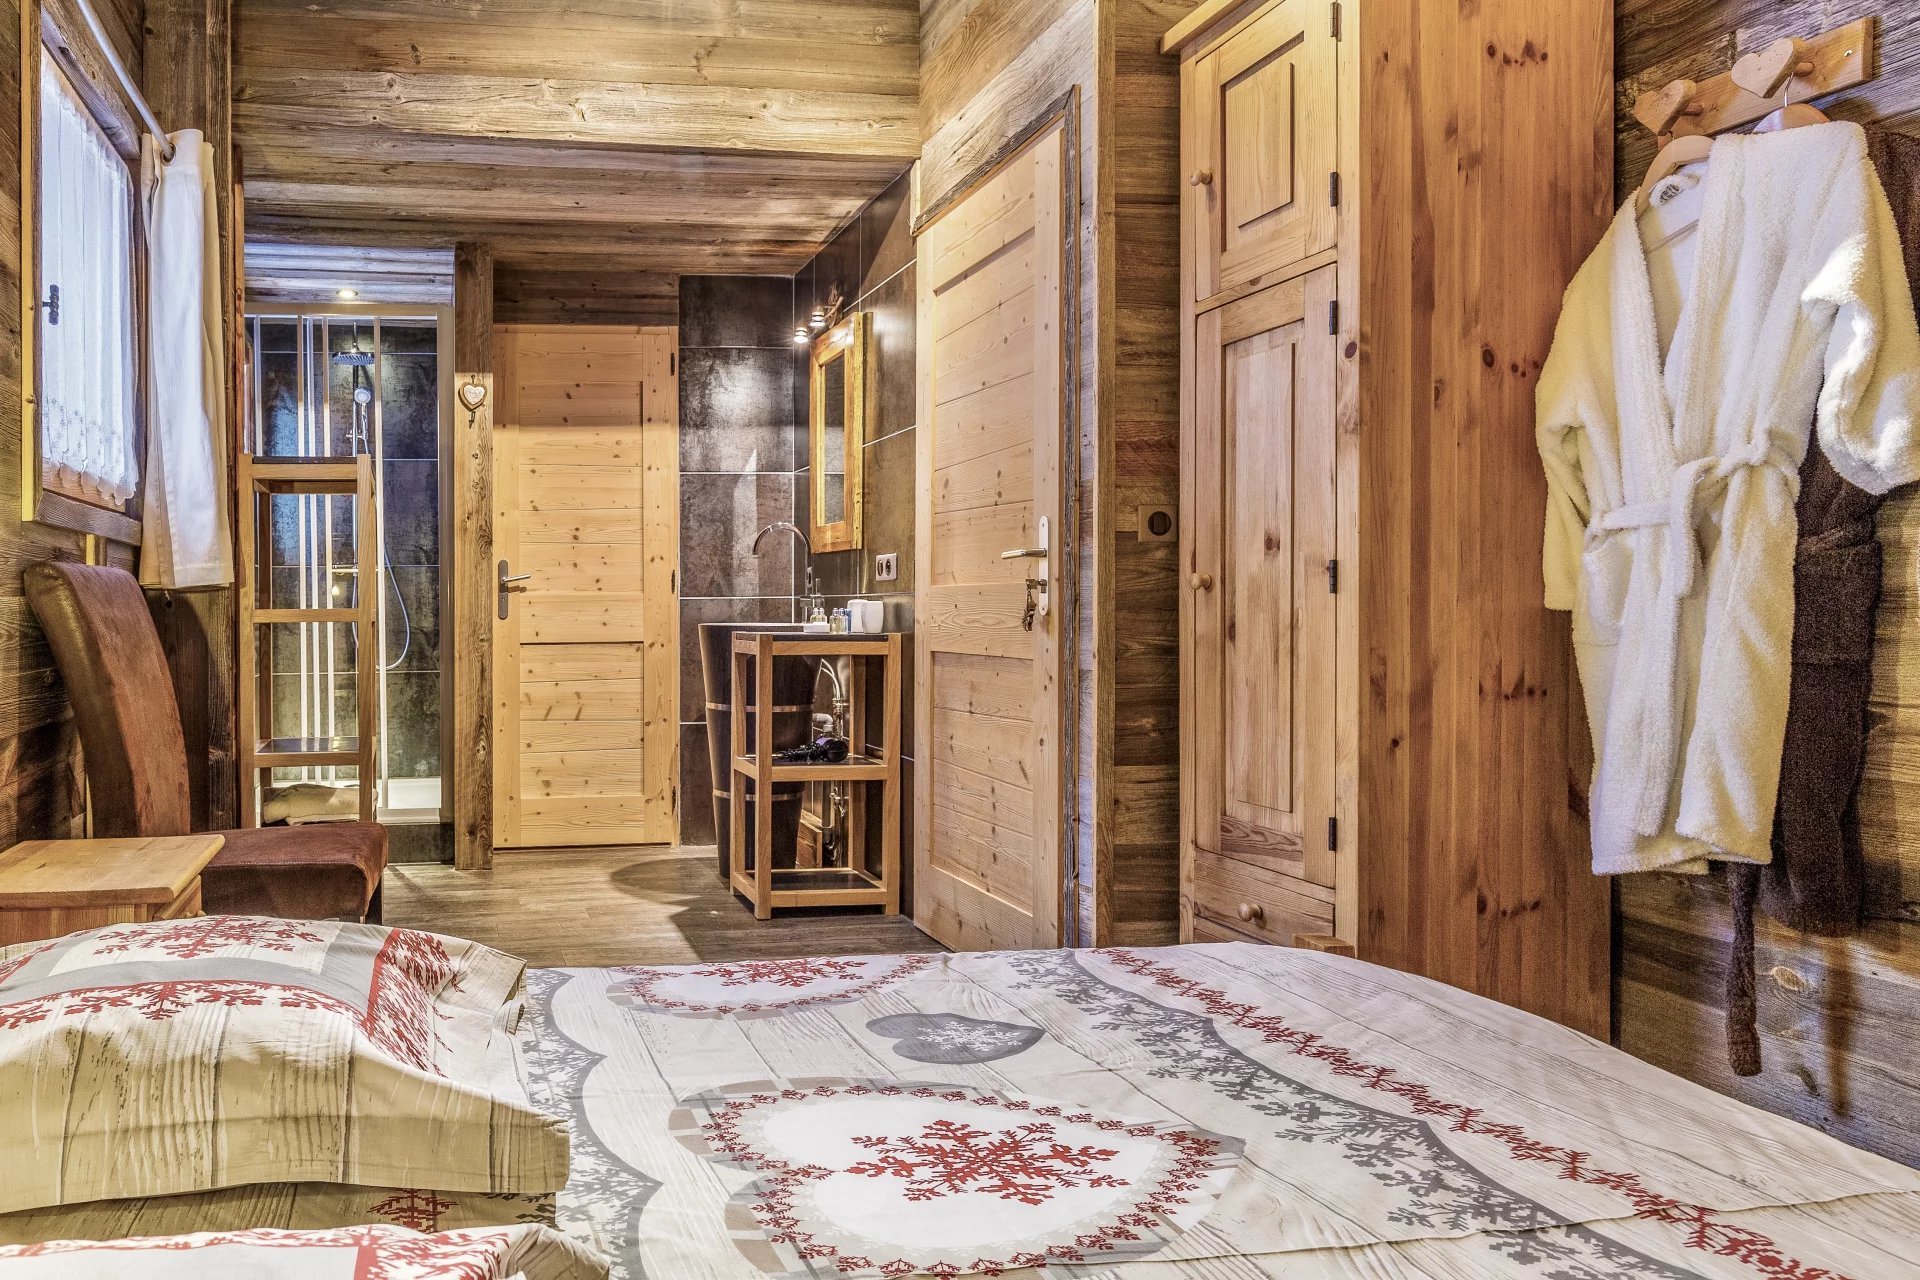 Francis+York+ Luxury Chalet in the La Plagne, French Alps 00004.jpeg